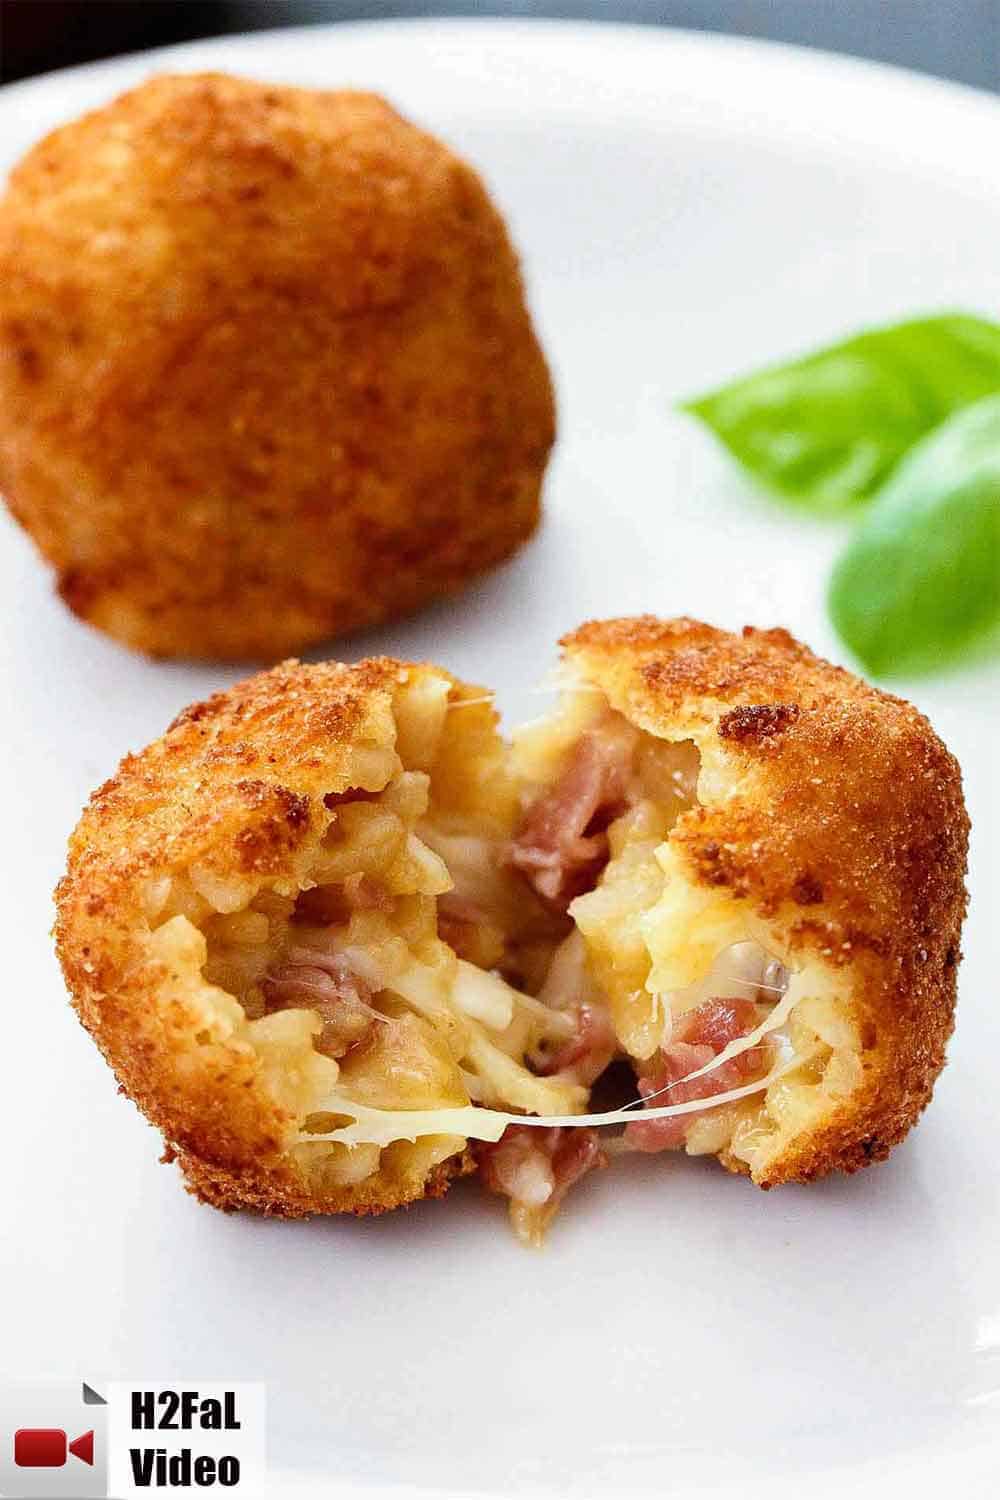 Split the arancini open and see the melted cheese and prosciutto